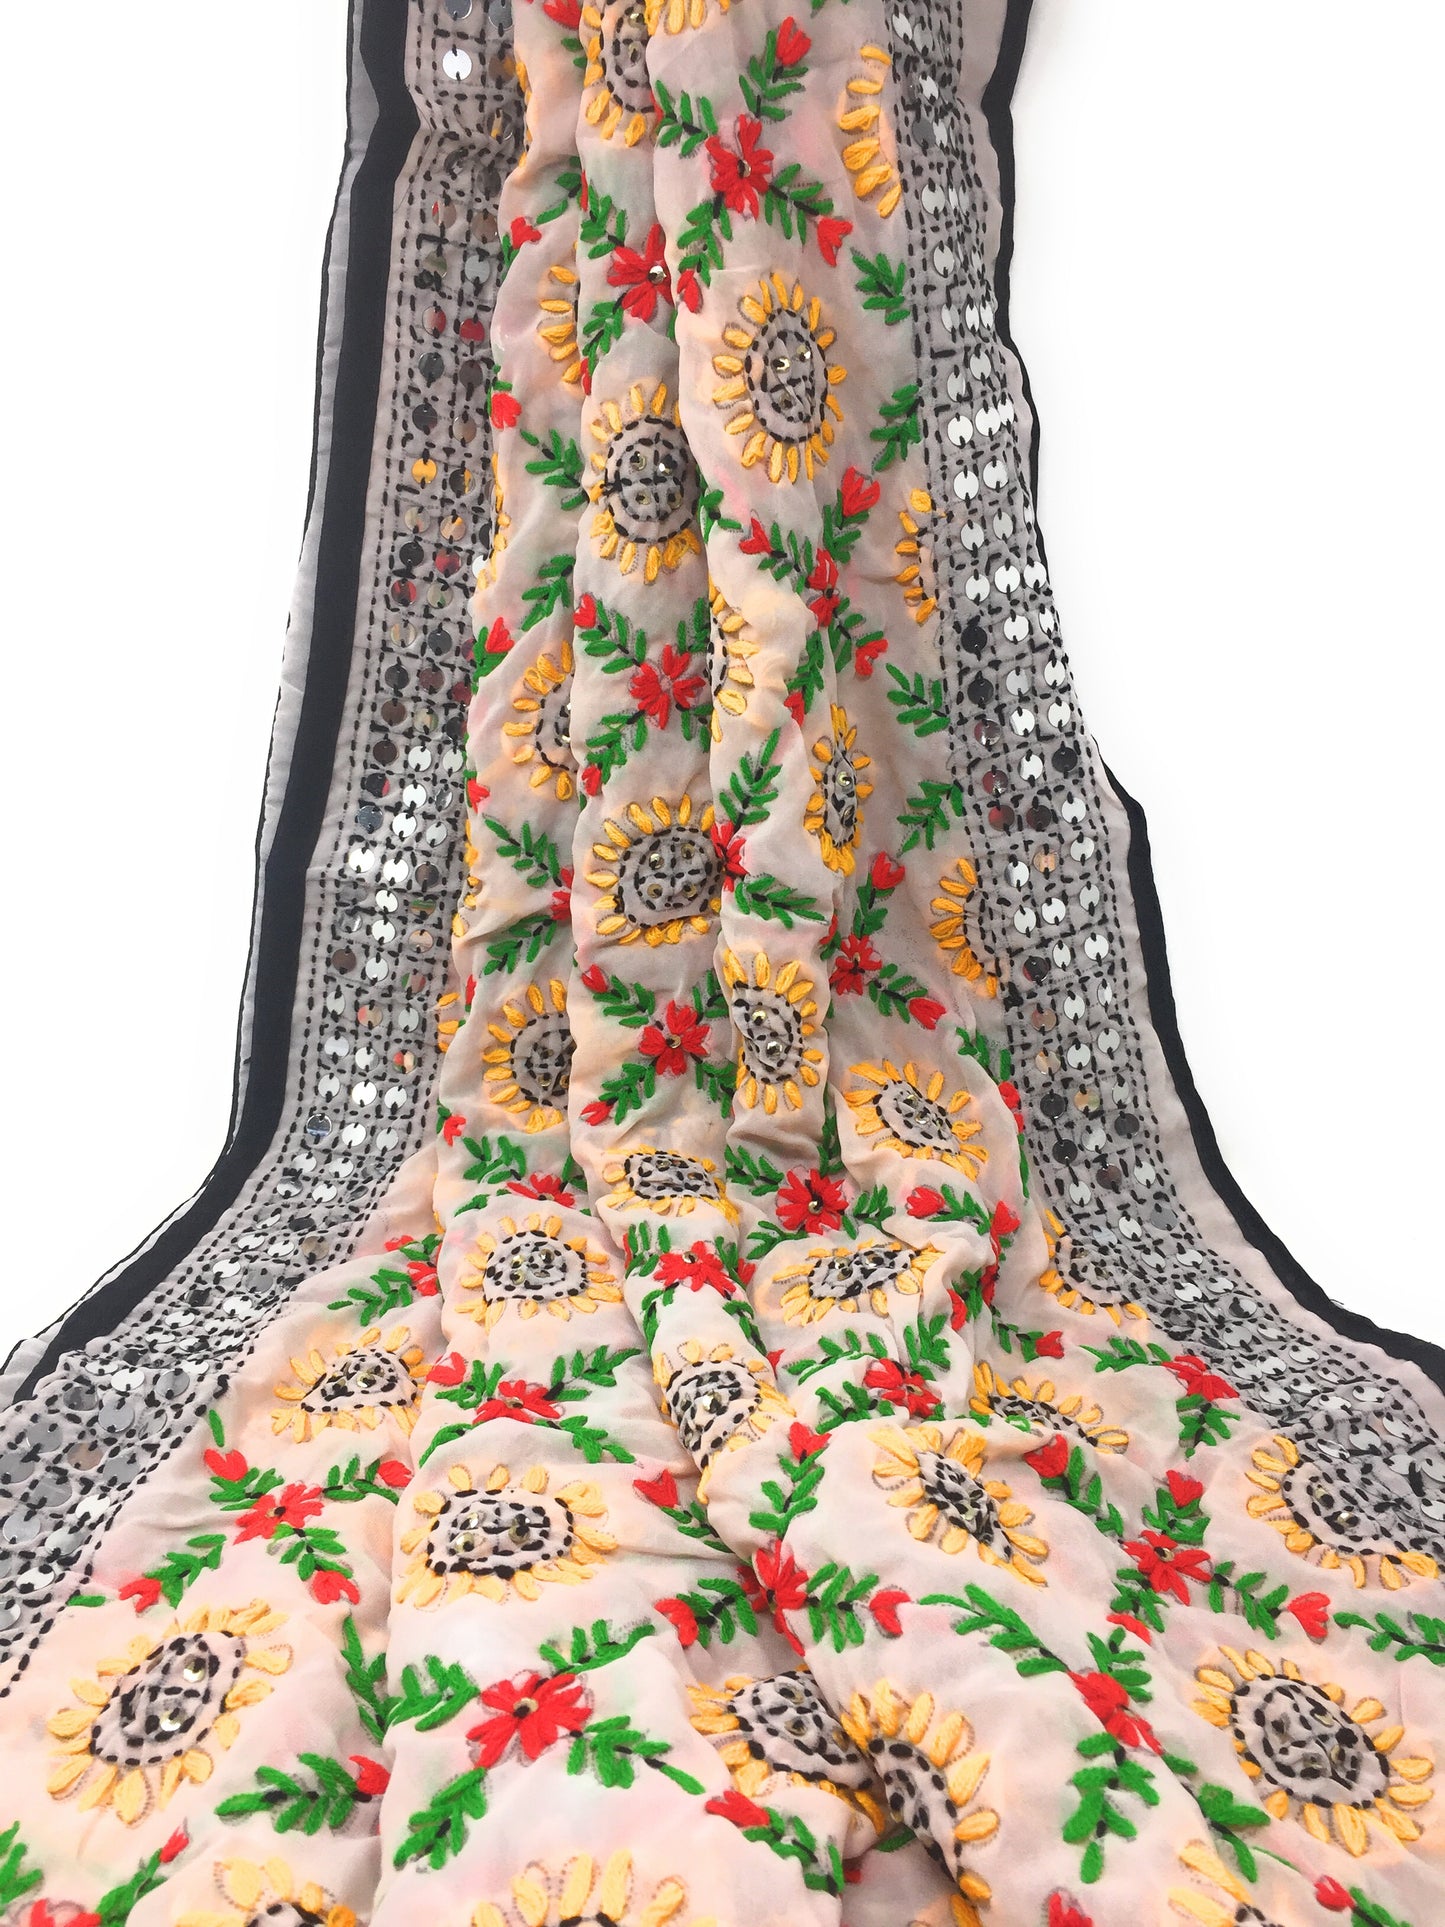 Black dress material cotton mirror embroidery n White embroidered dupatta